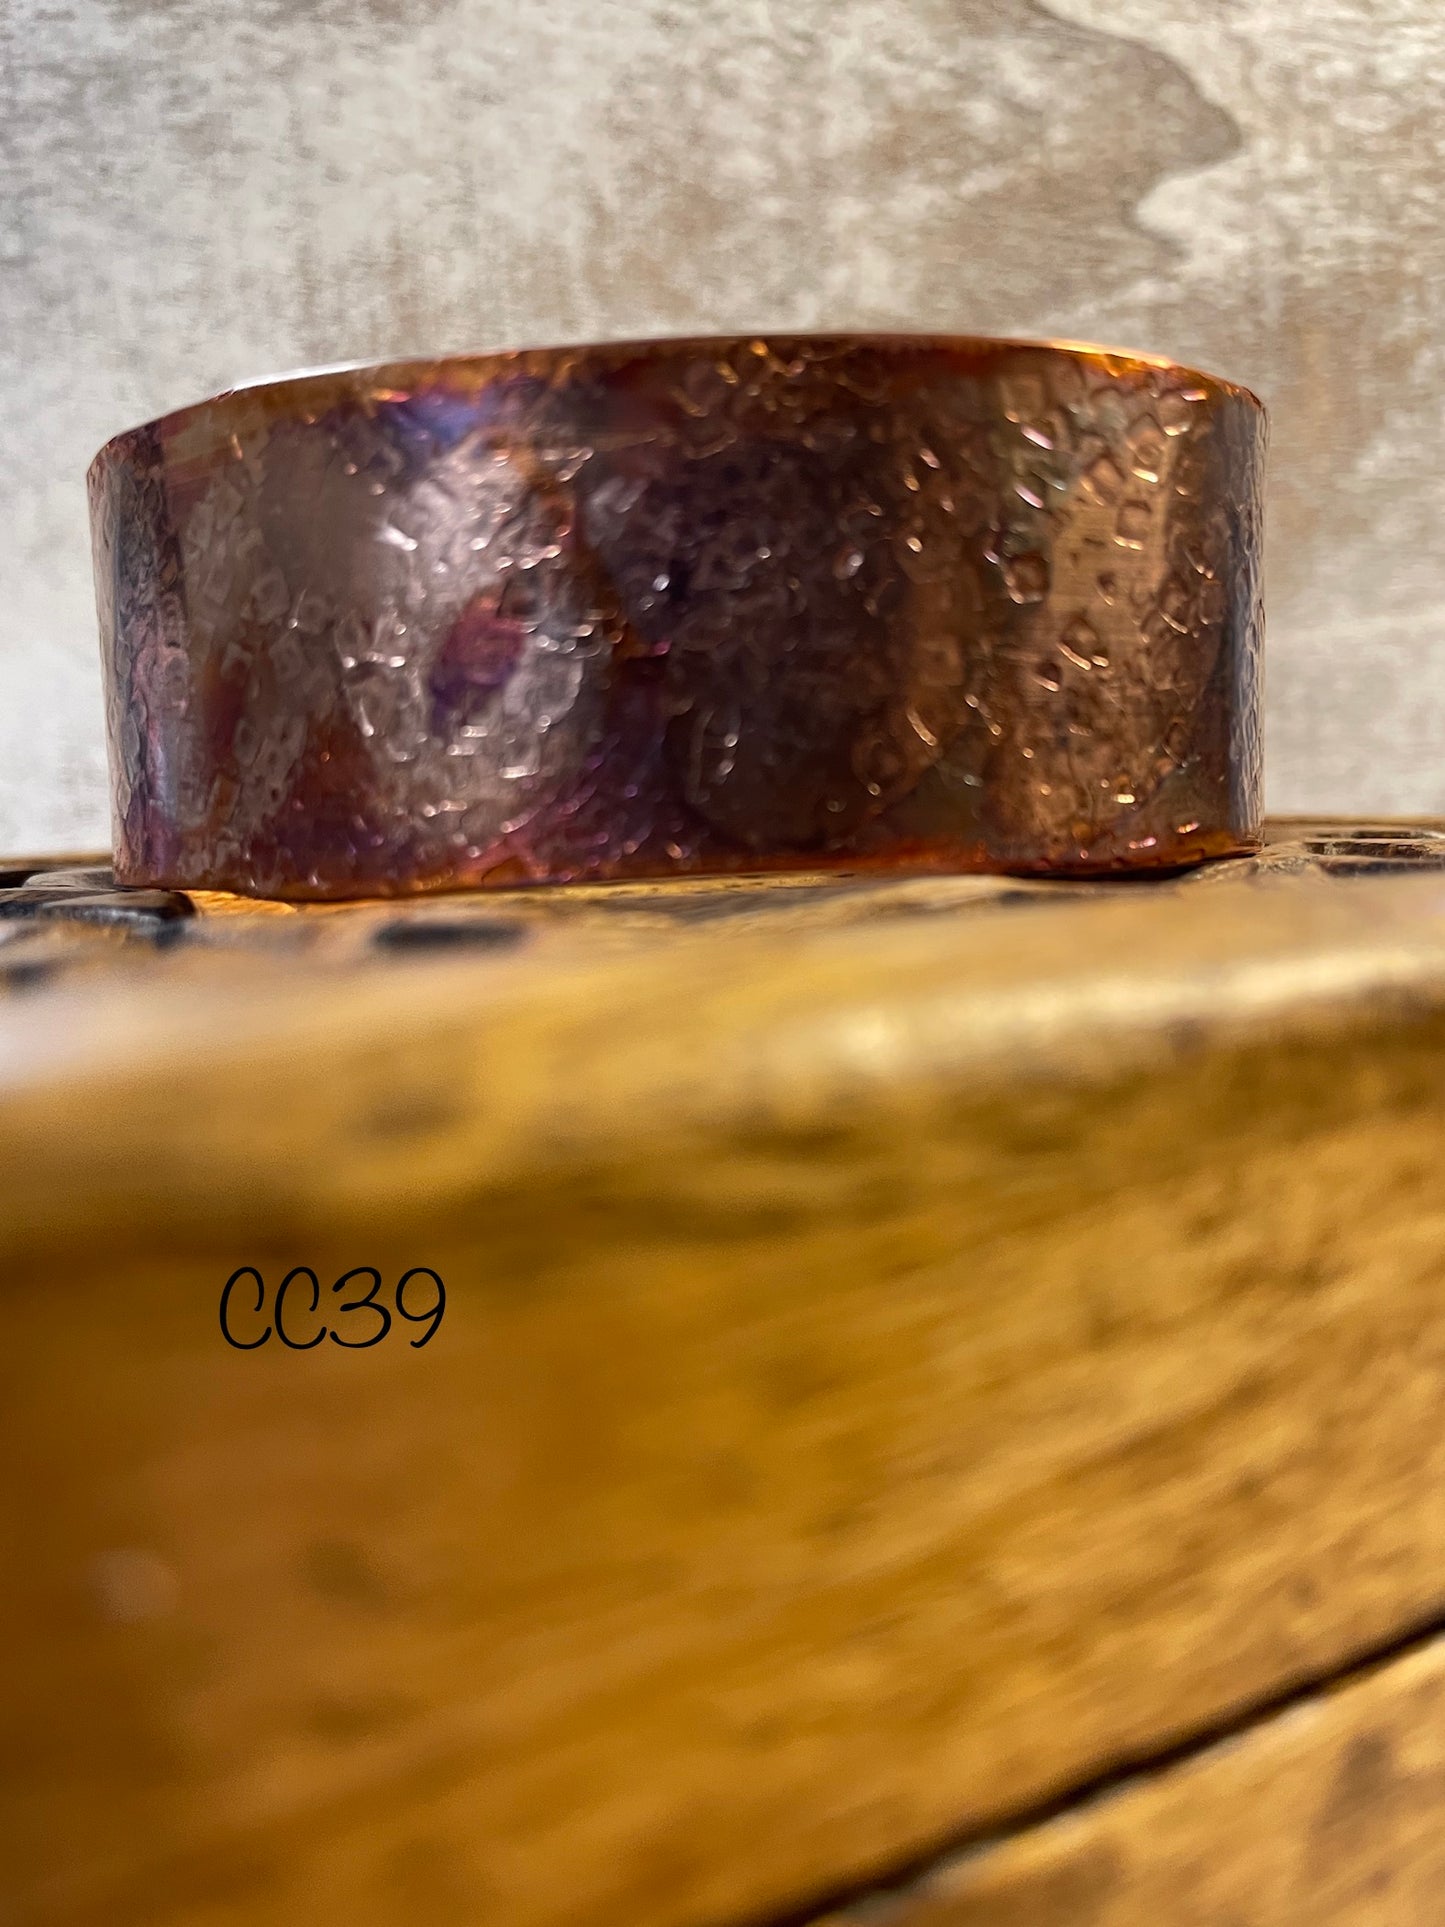 Flame Painted Copper Cuff Bracelet